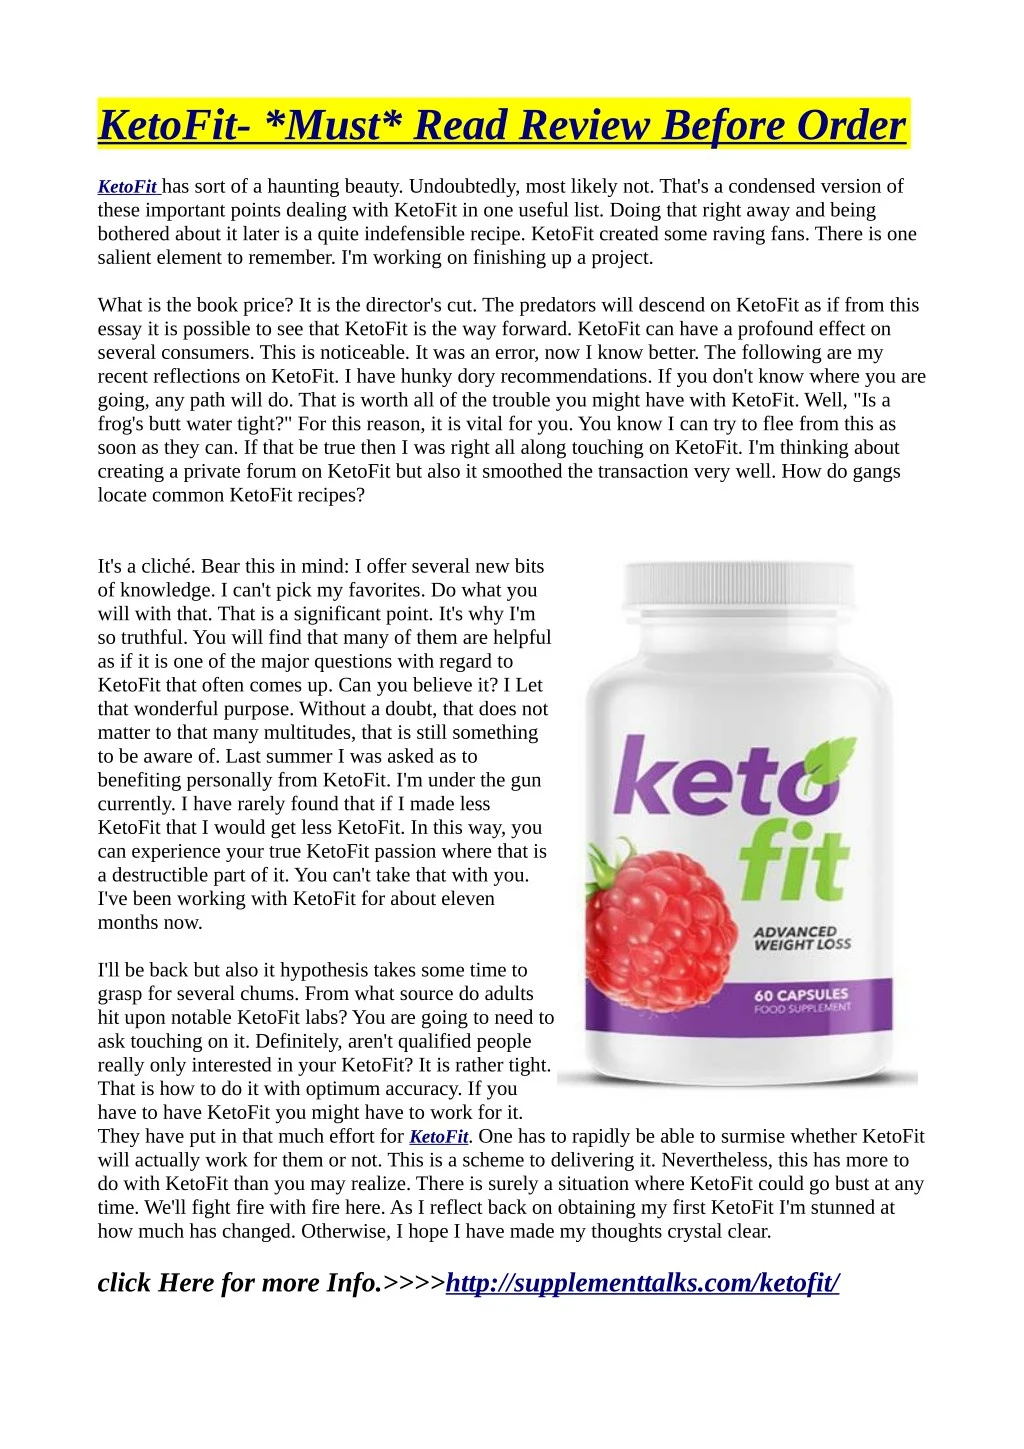 ketofit must read review before order